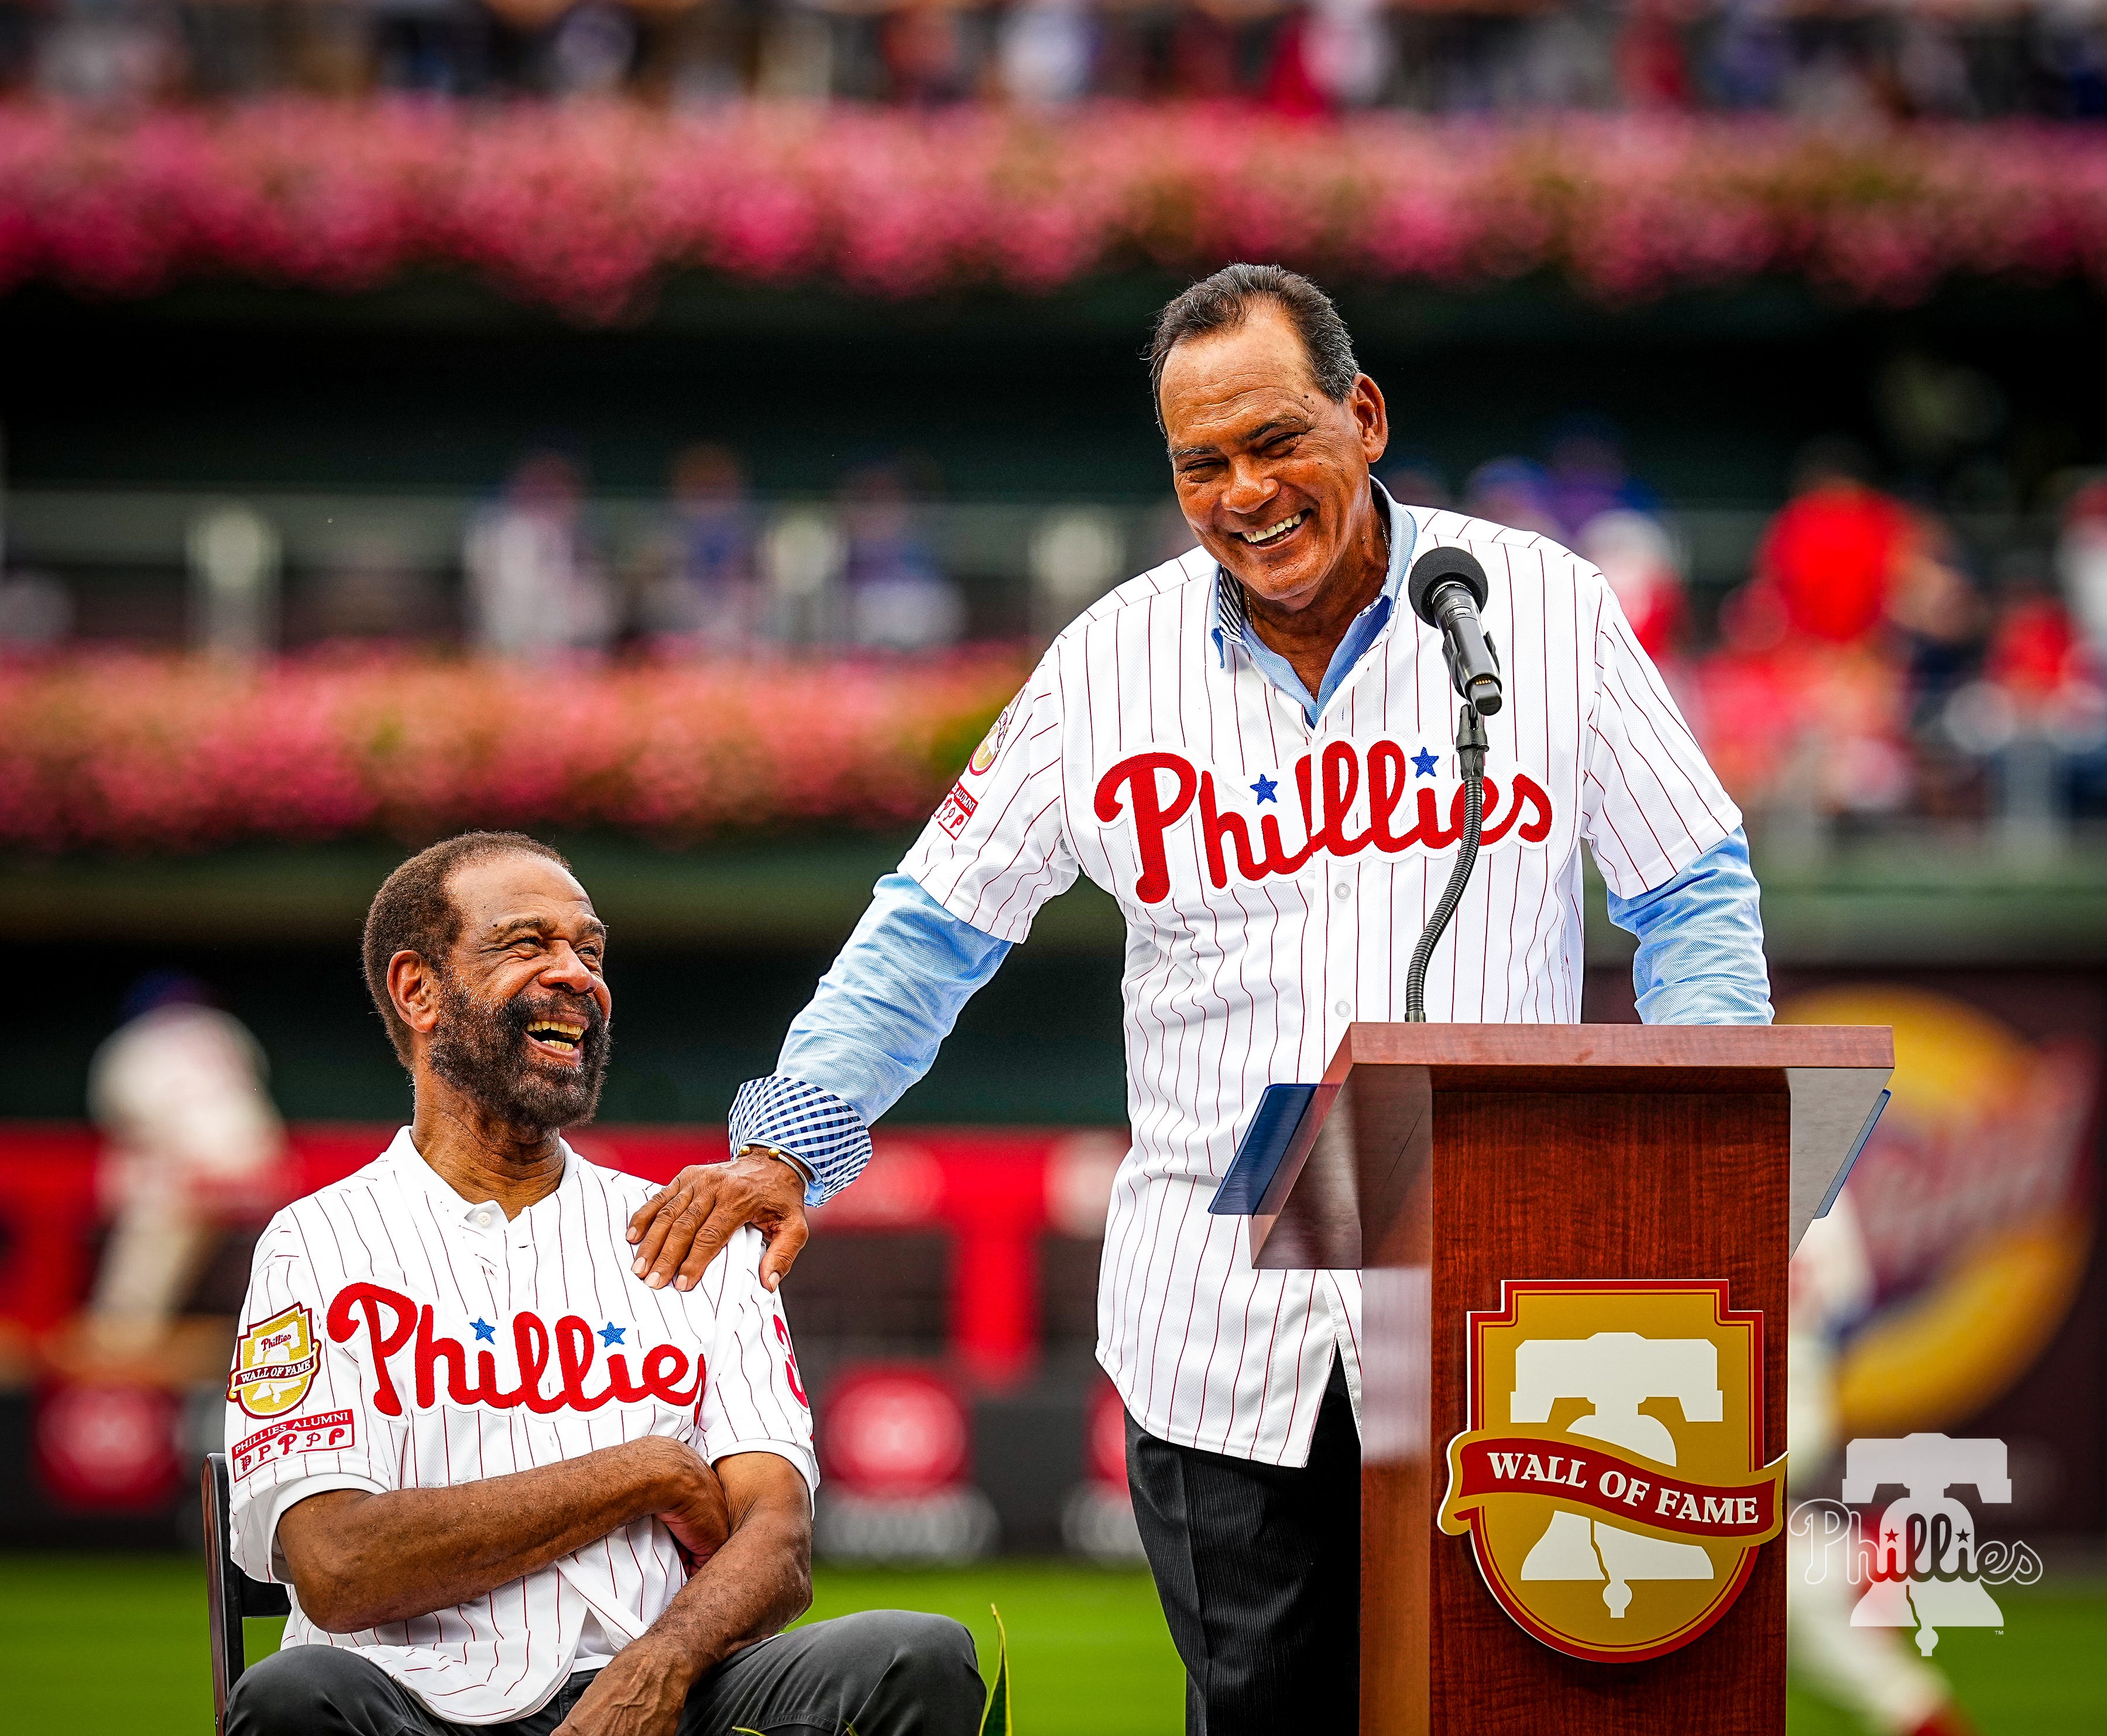 Manny Trillo is Phillies' 2020 Wall of Fame Inductee – NBC10 Philadelphia